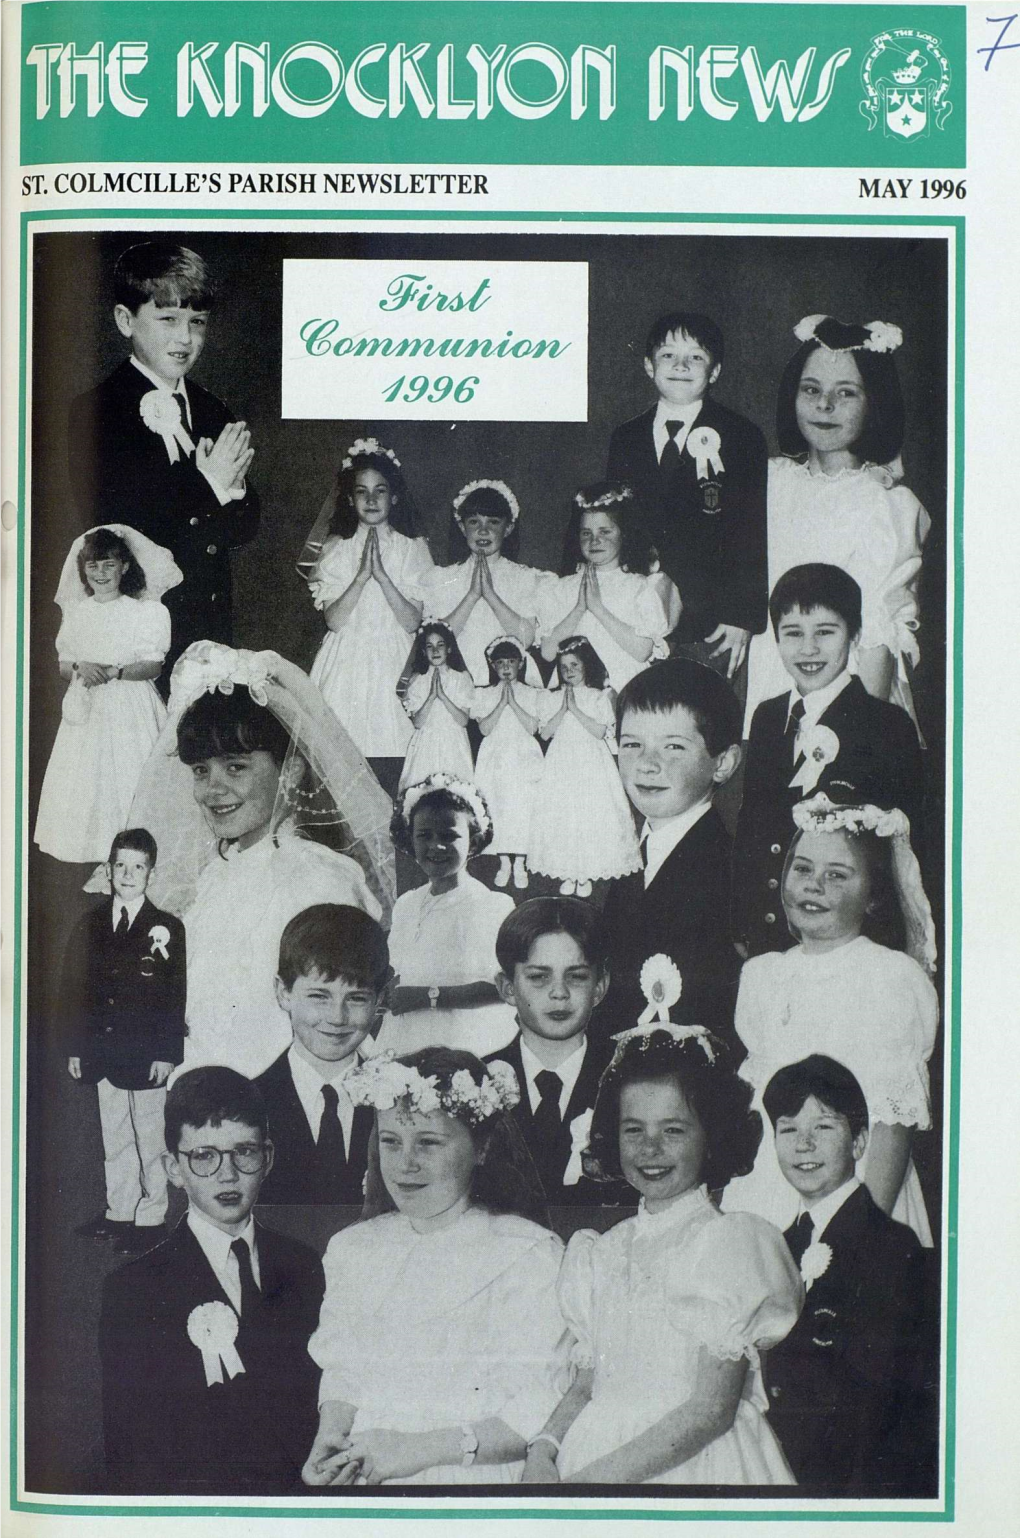 ST. COLMCILLE's PARISH NEWSLETTER MAY 1996 Dedicated Care Which I Saw Him Receiving Made a Lasting Impression on Me"